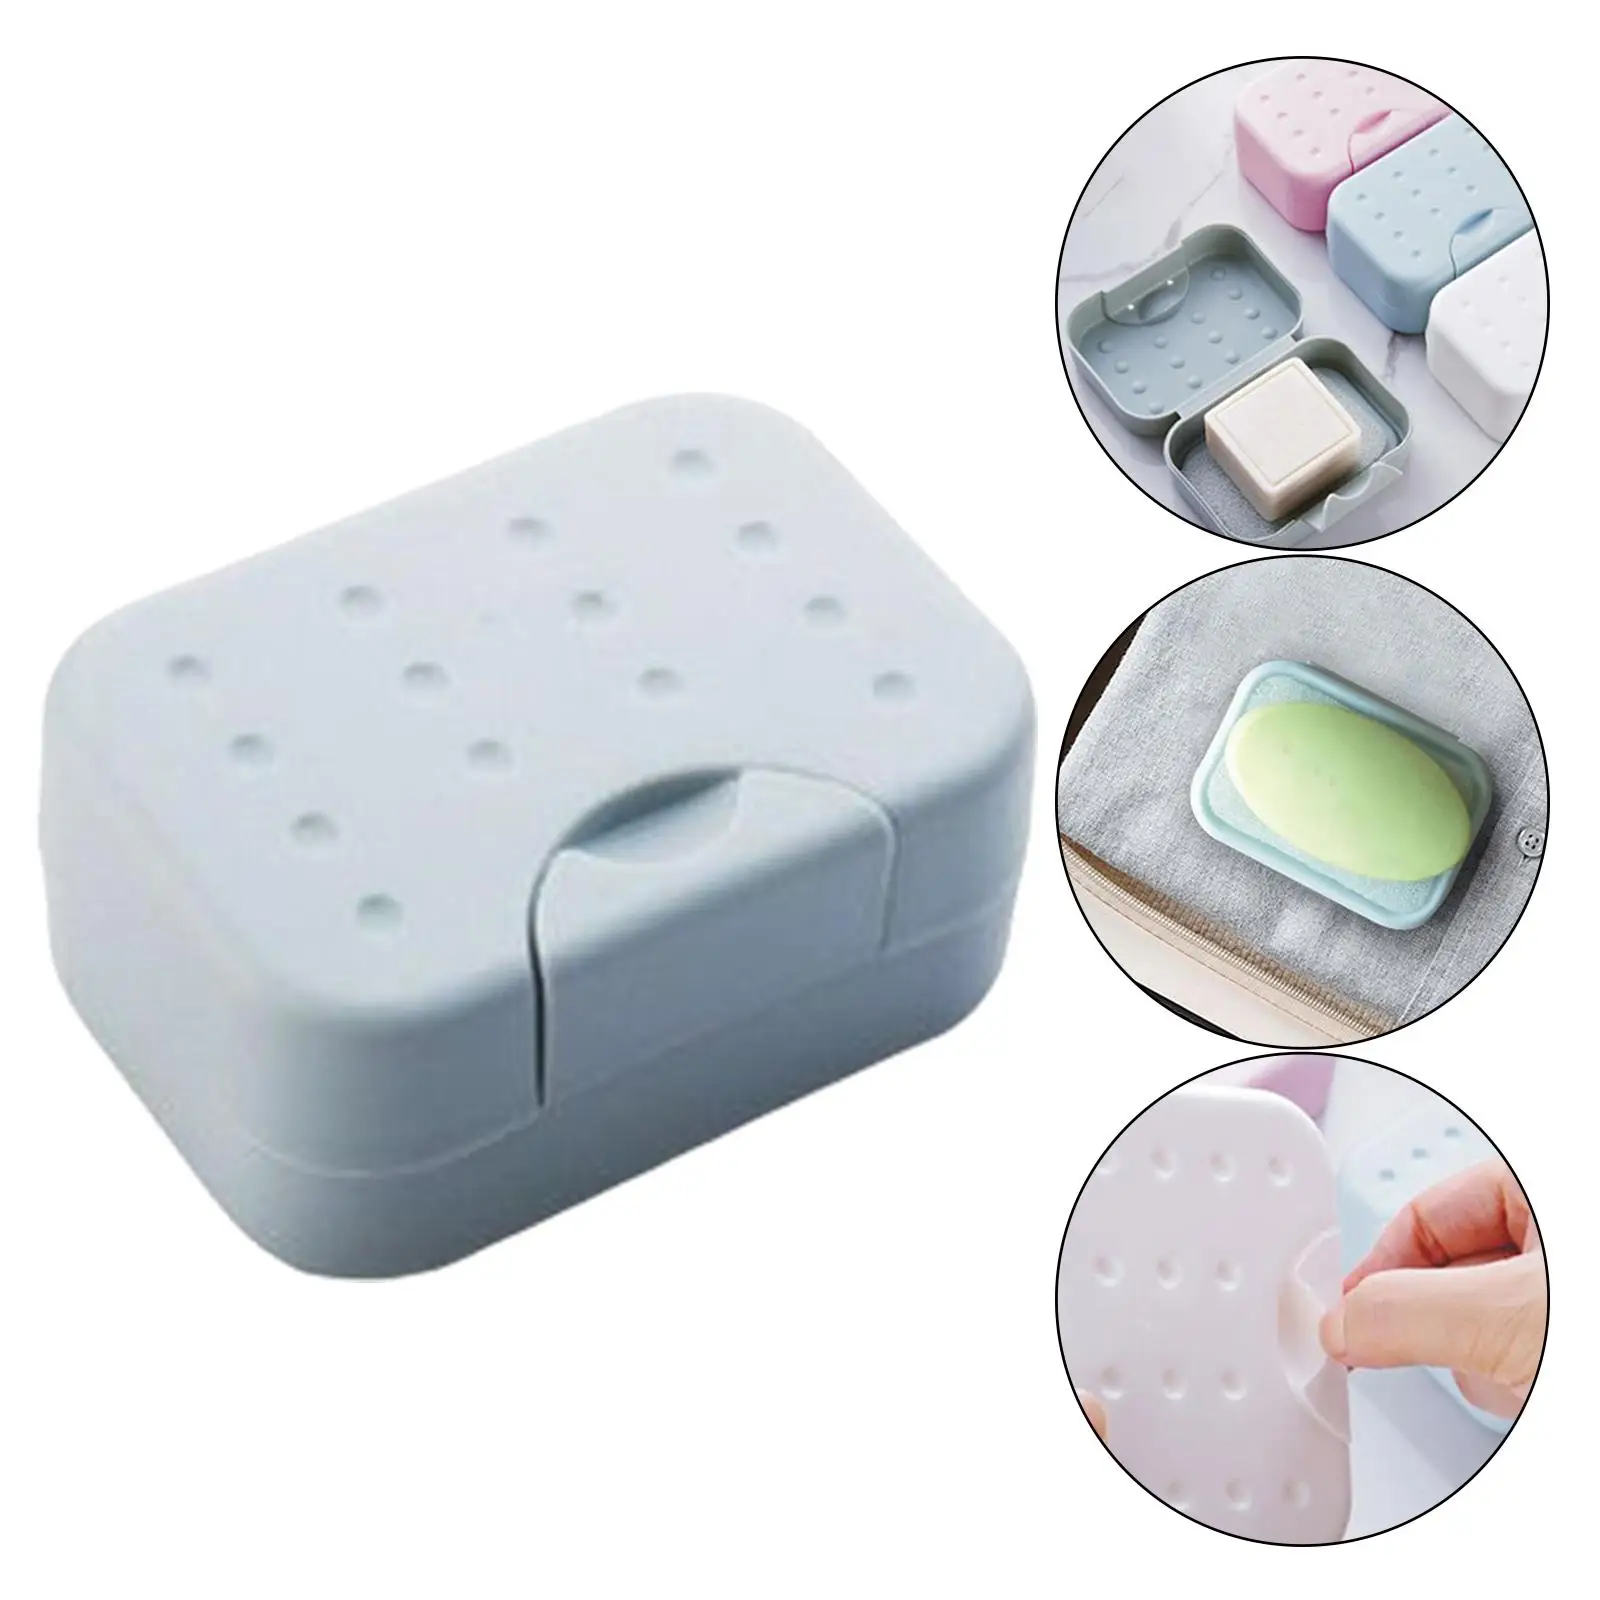 Portable Travel Soap Box Container Case Dish Holder for Camping School Gym Leakproof Sealed Waterproof